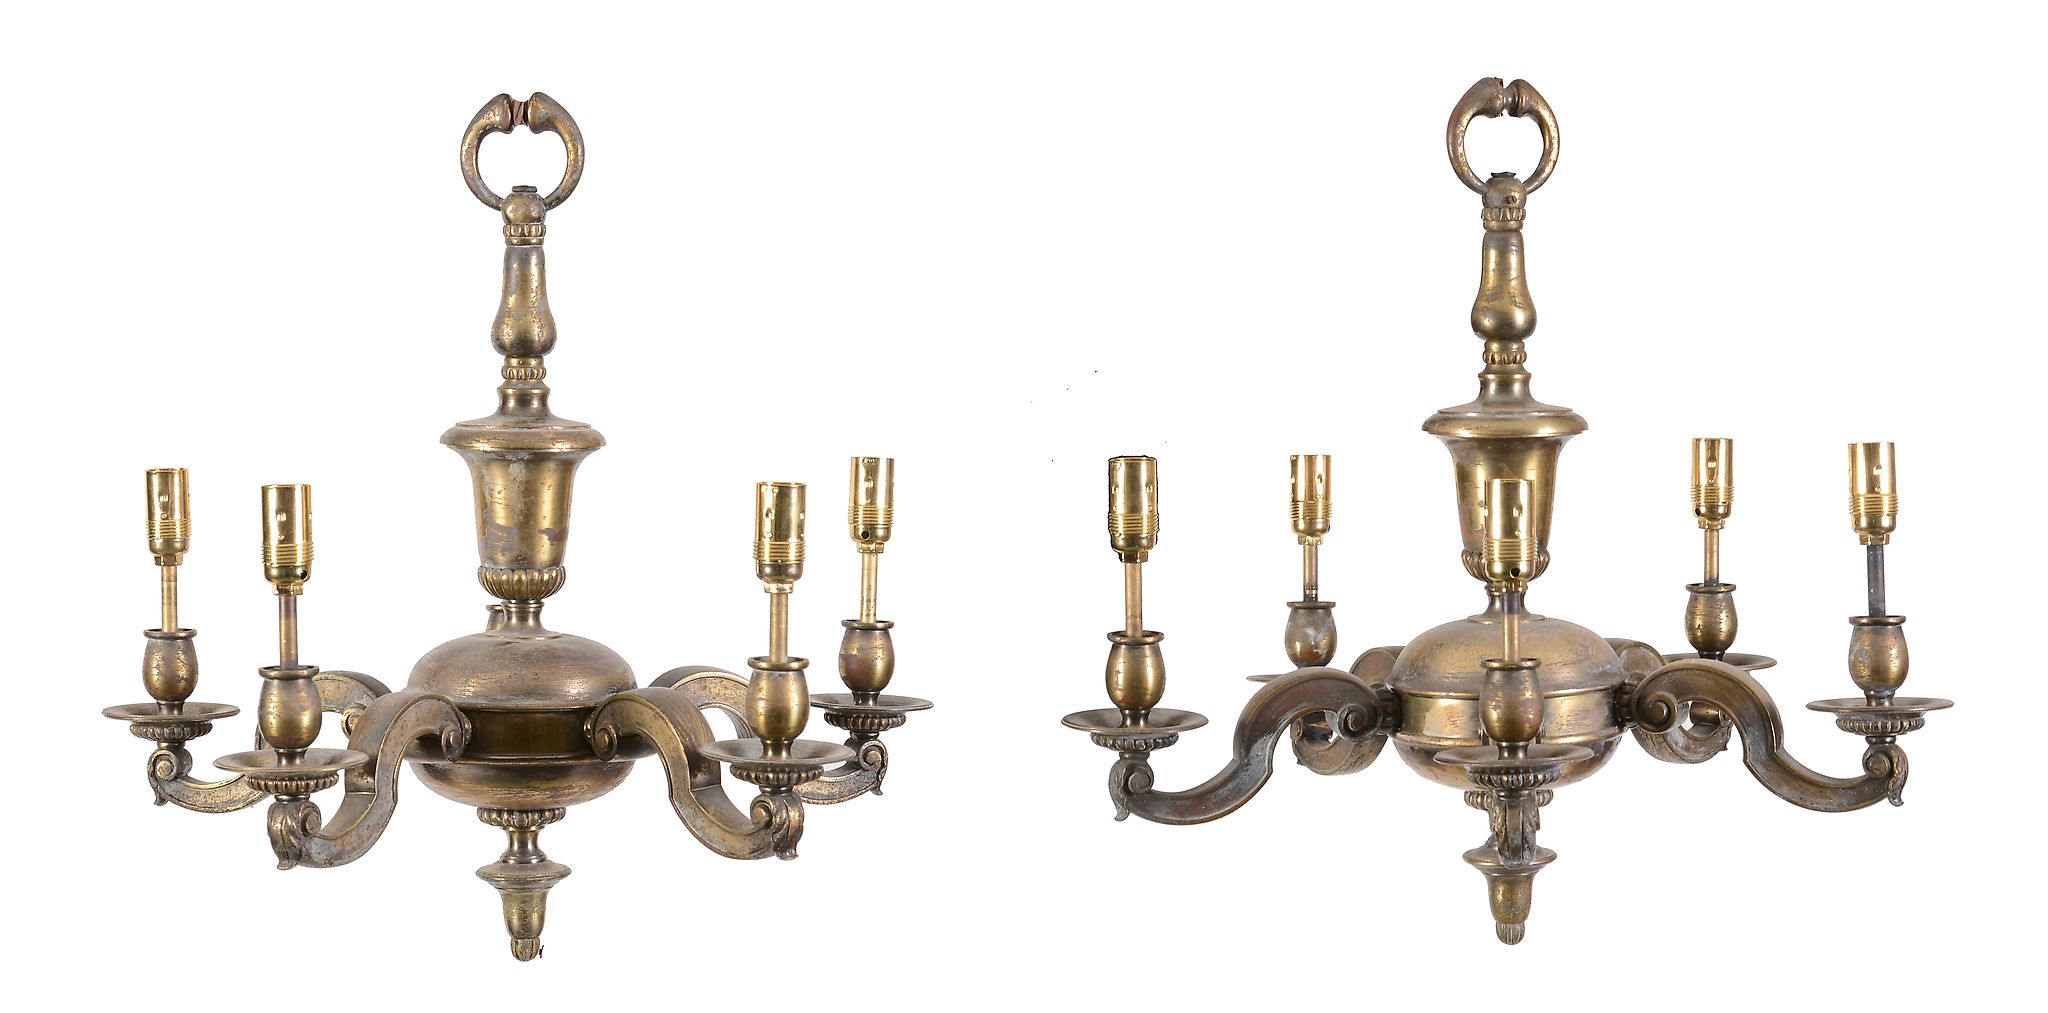 A pair of gilt brass five light chandeliers in William and Mary style